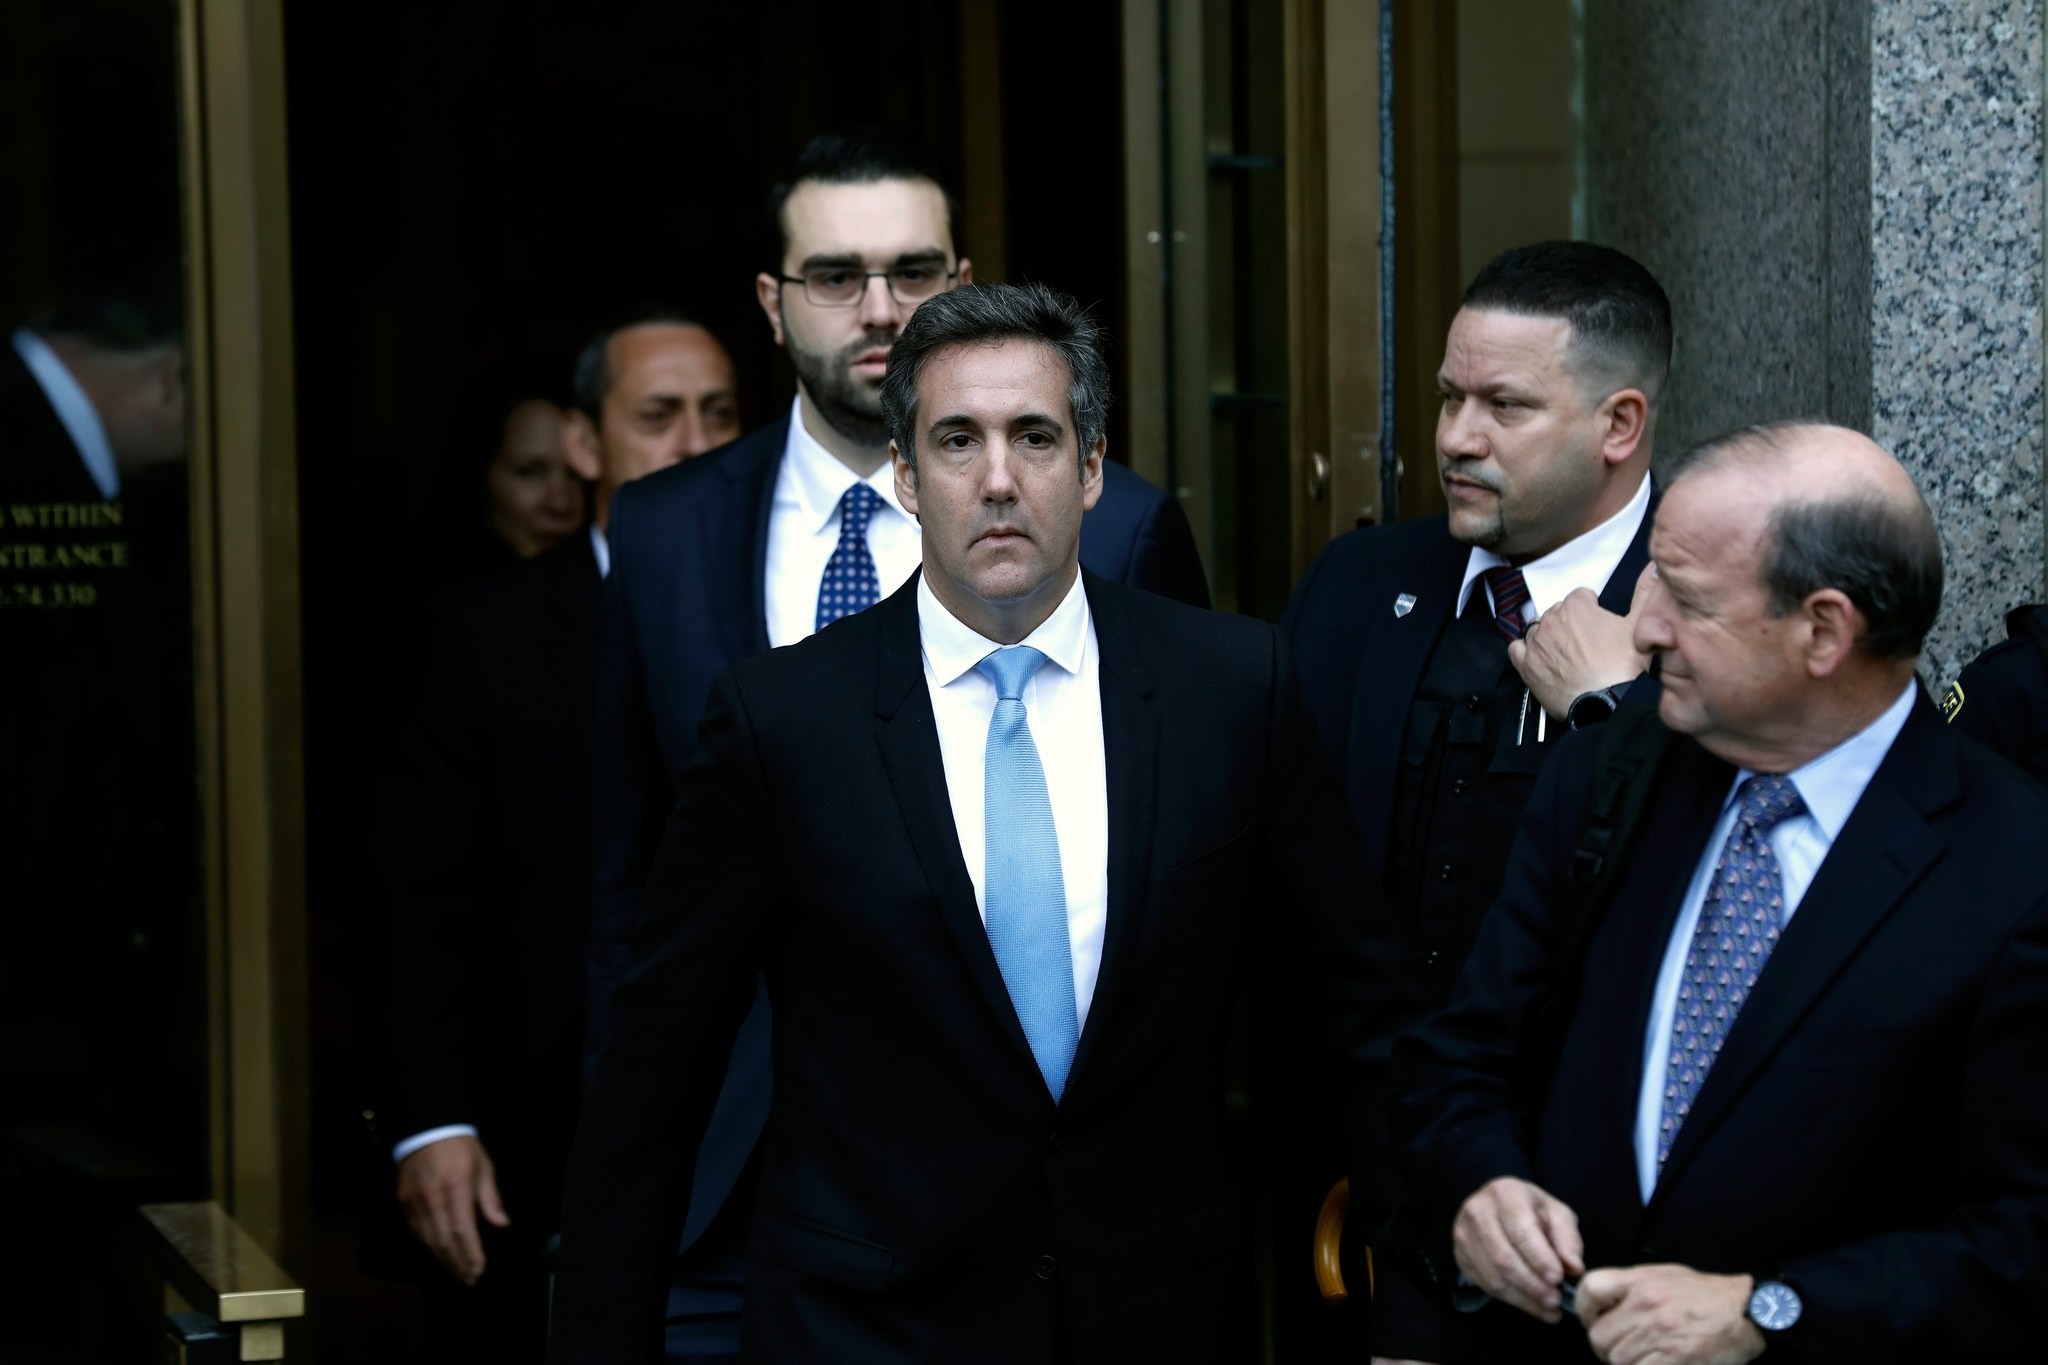 Attorney Michael Cohen, US President Donald J. Trump's long-time personal attorney exits federal court in New York City, New York, USA, 16 April 2018. (EPA Photo)